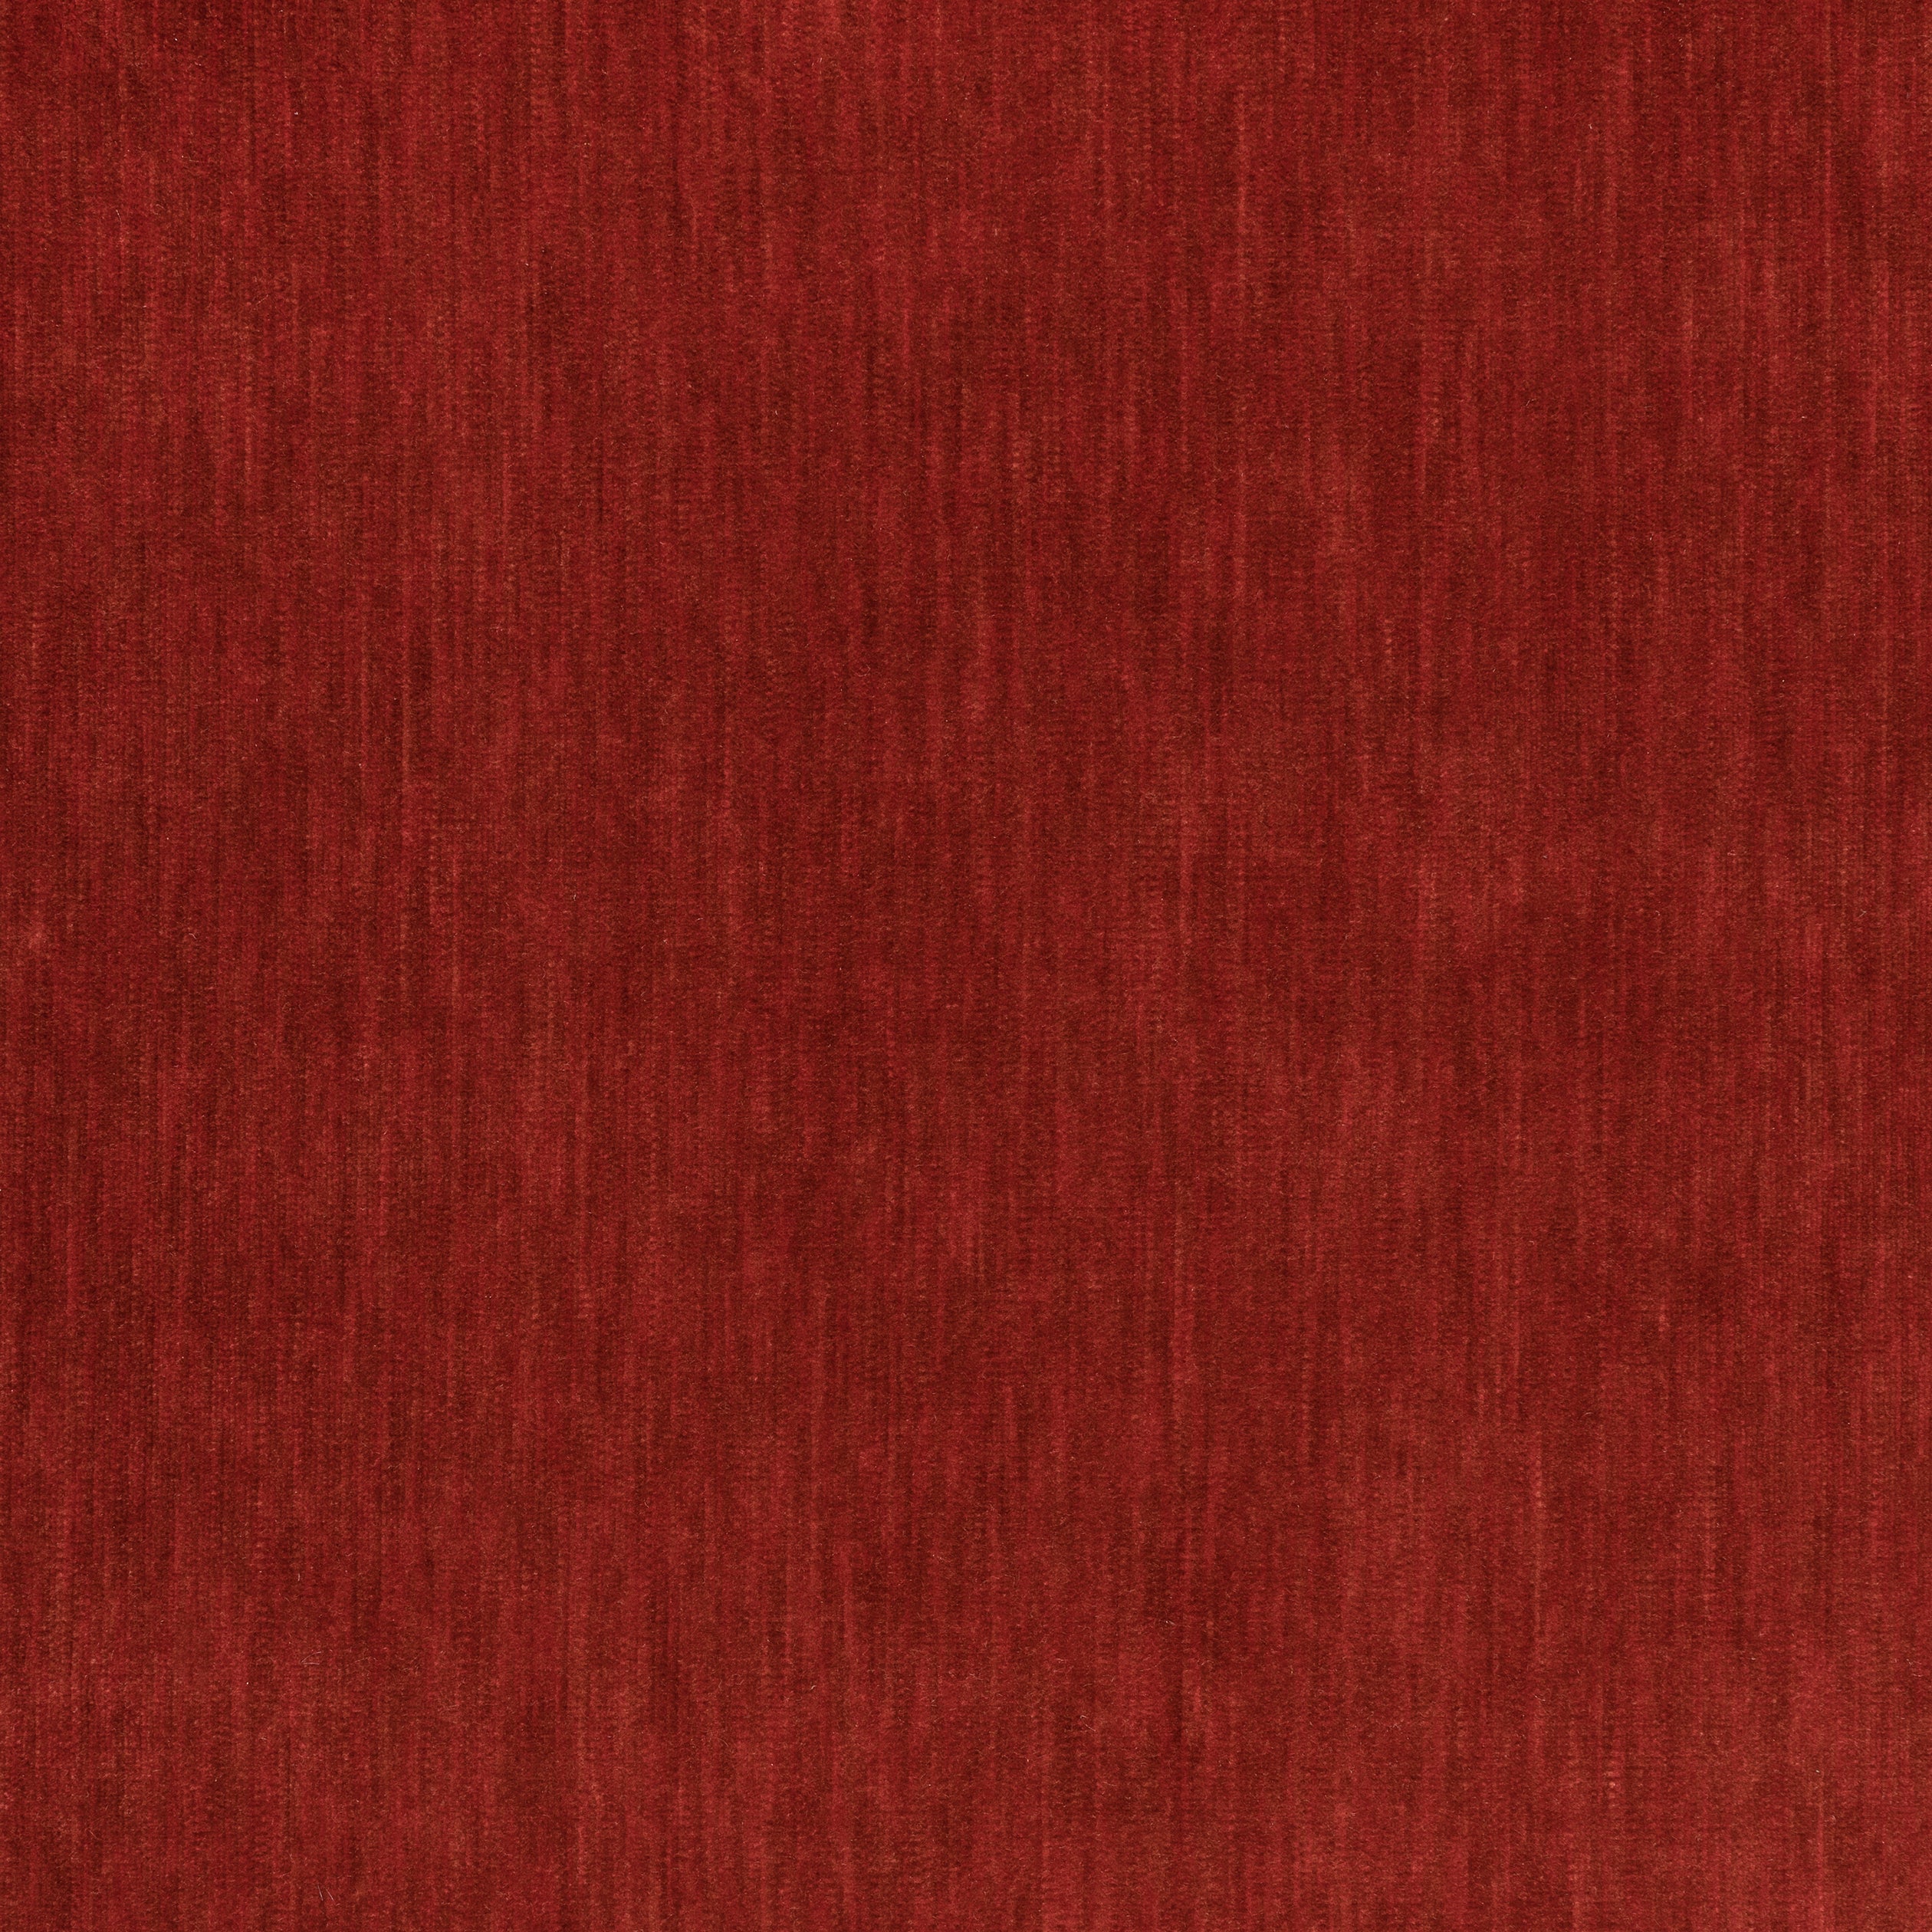 Riff Velvet fabric in autumn color - pattern number W72832 - by Thibaut in the Woven Resource 13: Fusion Velvets collection